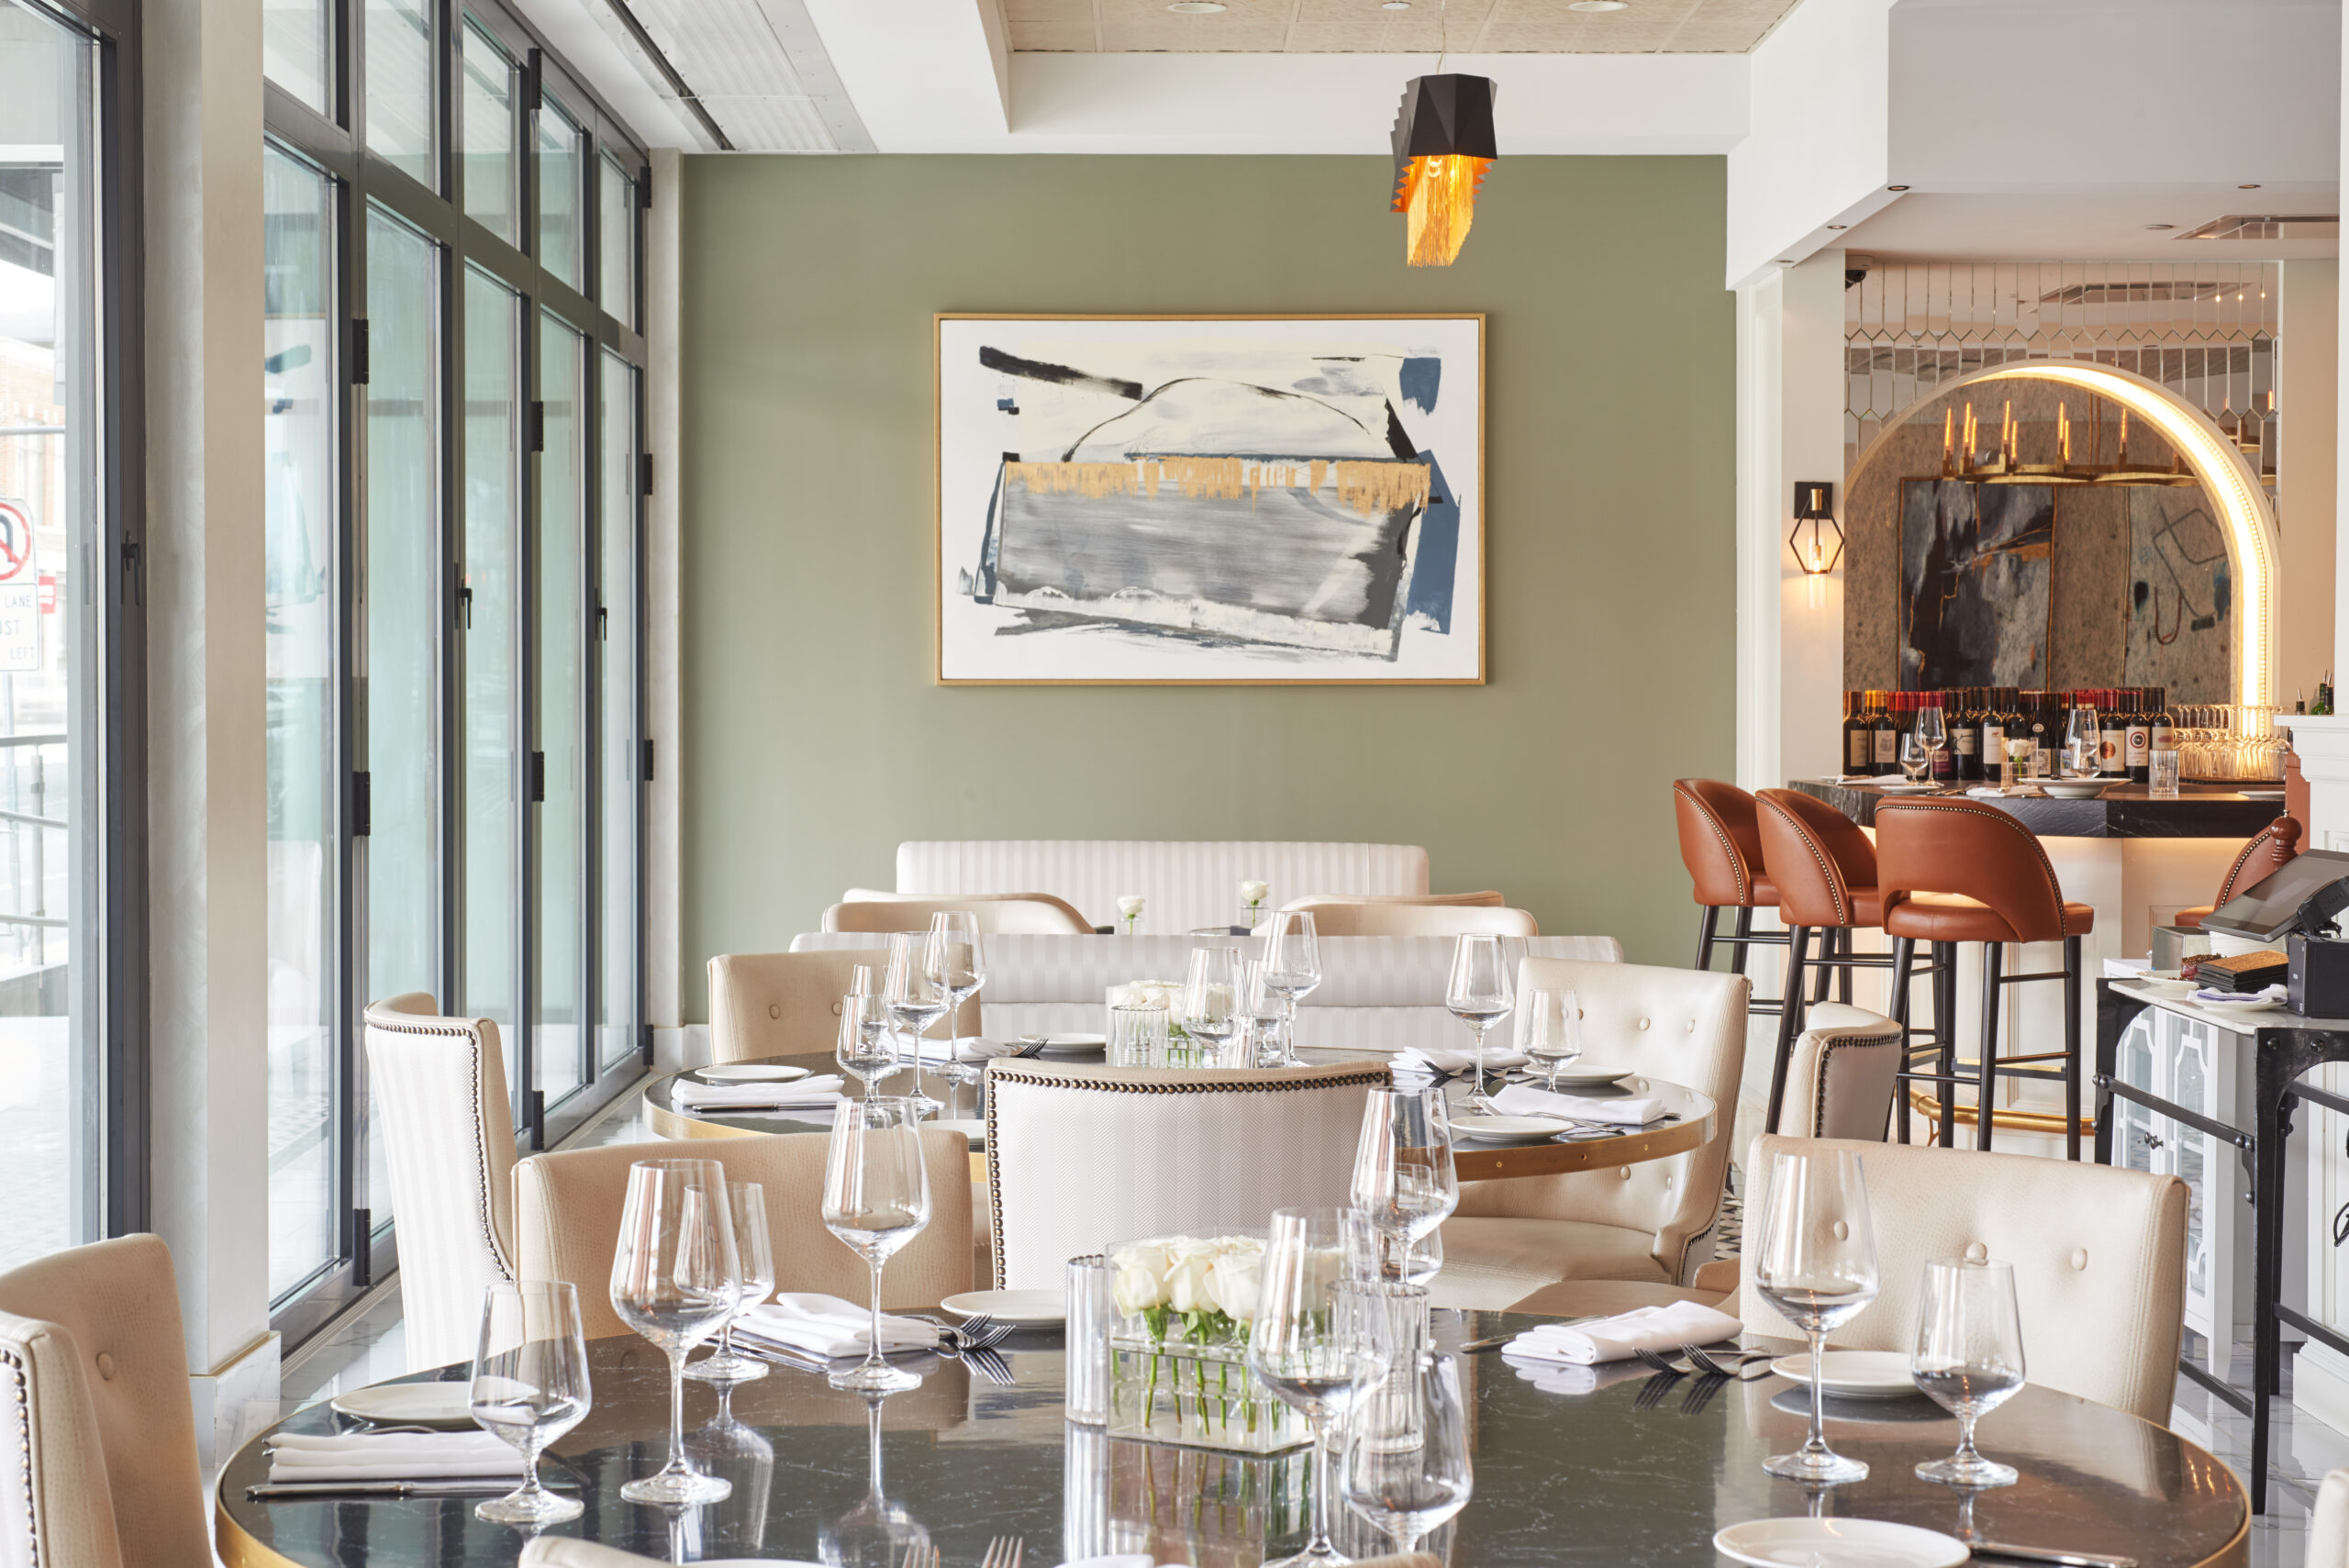 Elegant restaurant lounge and steakhouse interior design, white seating in front of green wall